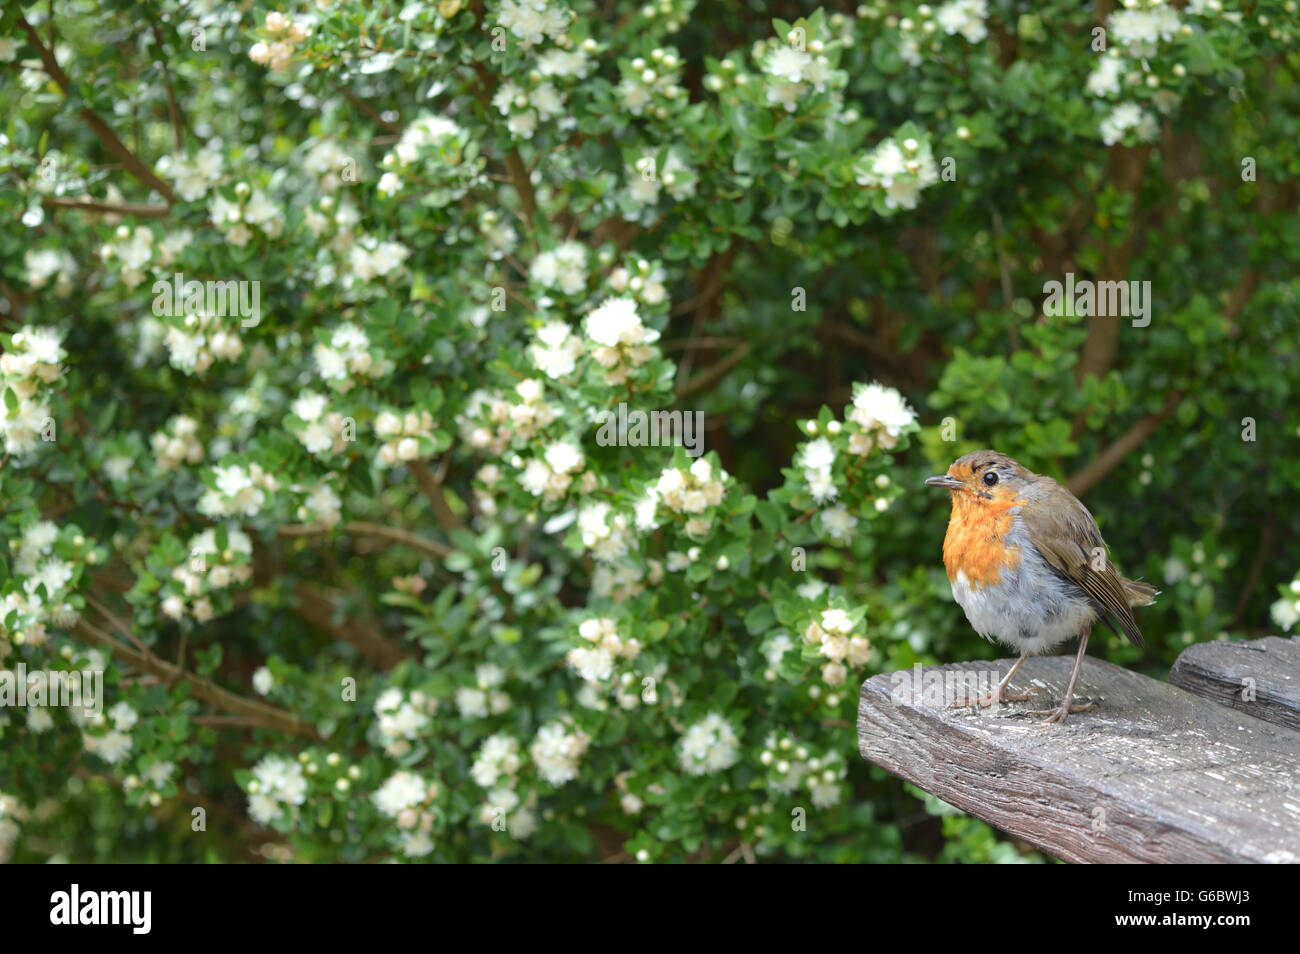 Bird sitting on a table in the nature. Stock Photo